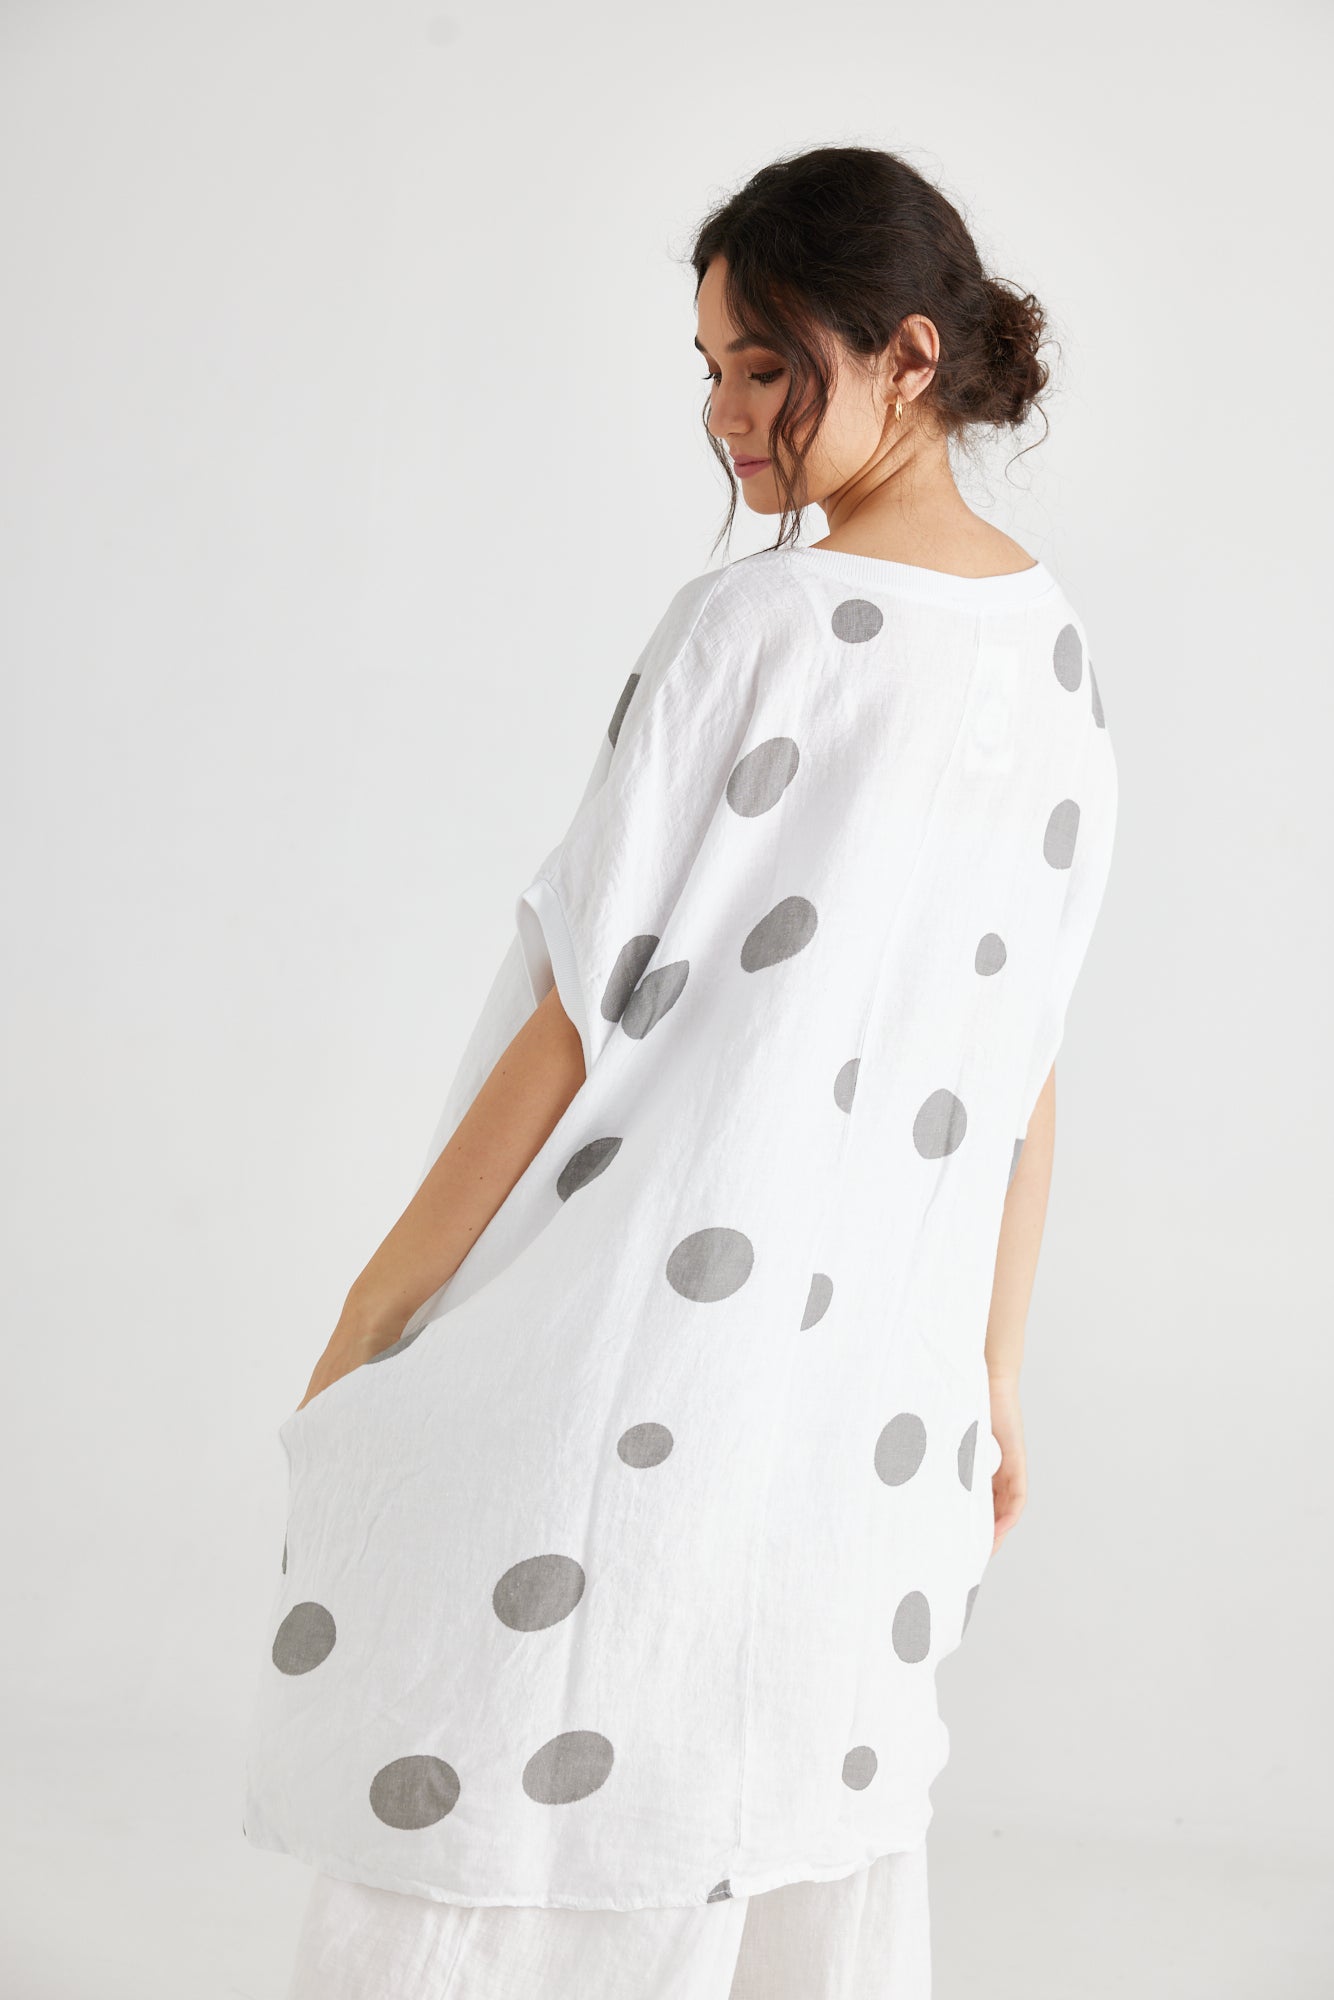 Rosabella Linen top. White and Taupe Polka dot.